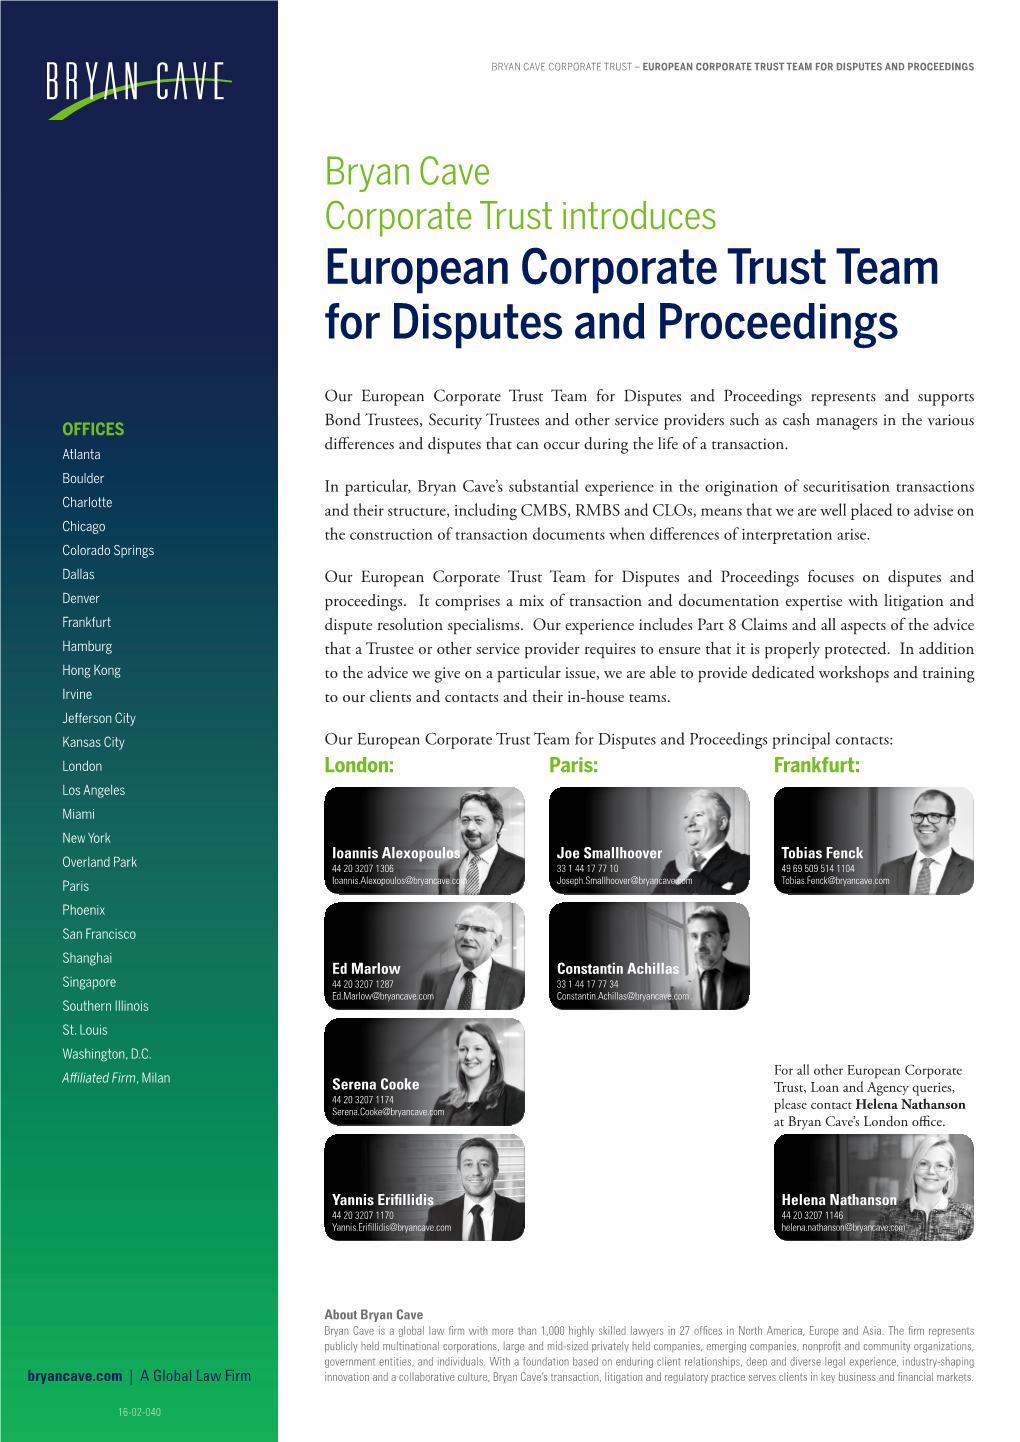 European Corporate Trust Team for Disputes and Proceedings